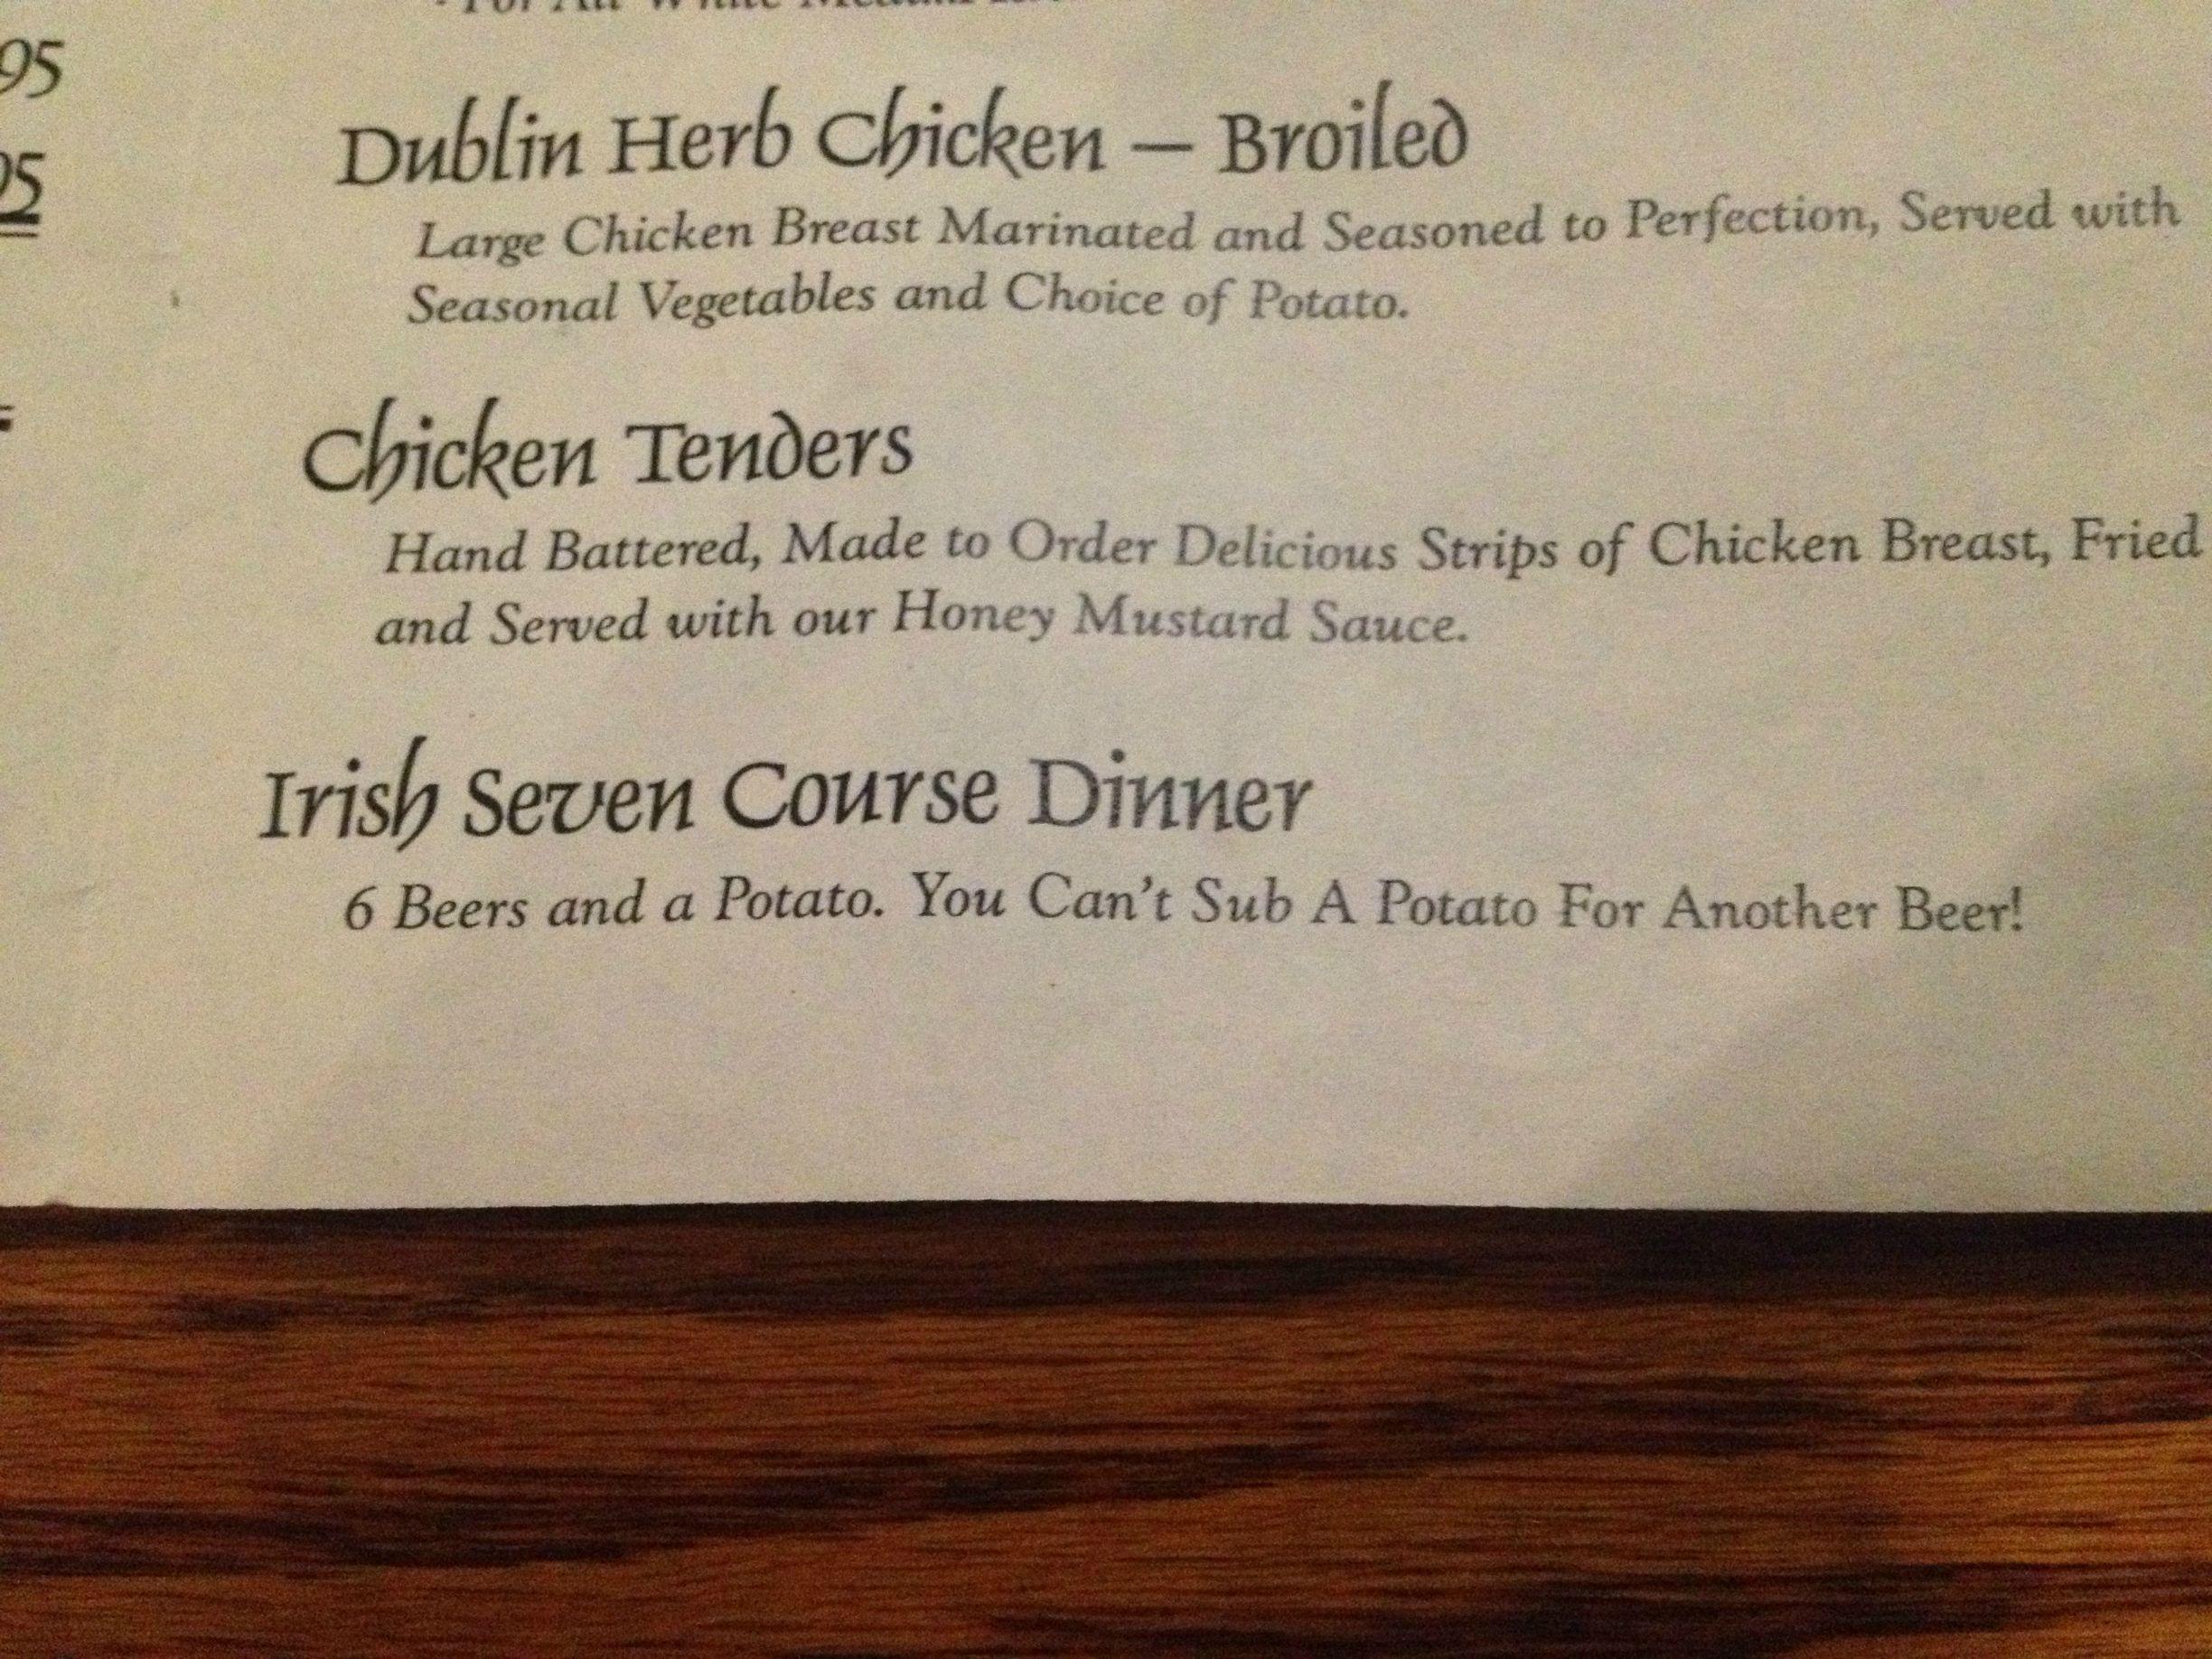 irish seven course dinner, 6 beers and a potato, you can't sub a potato for another beer!